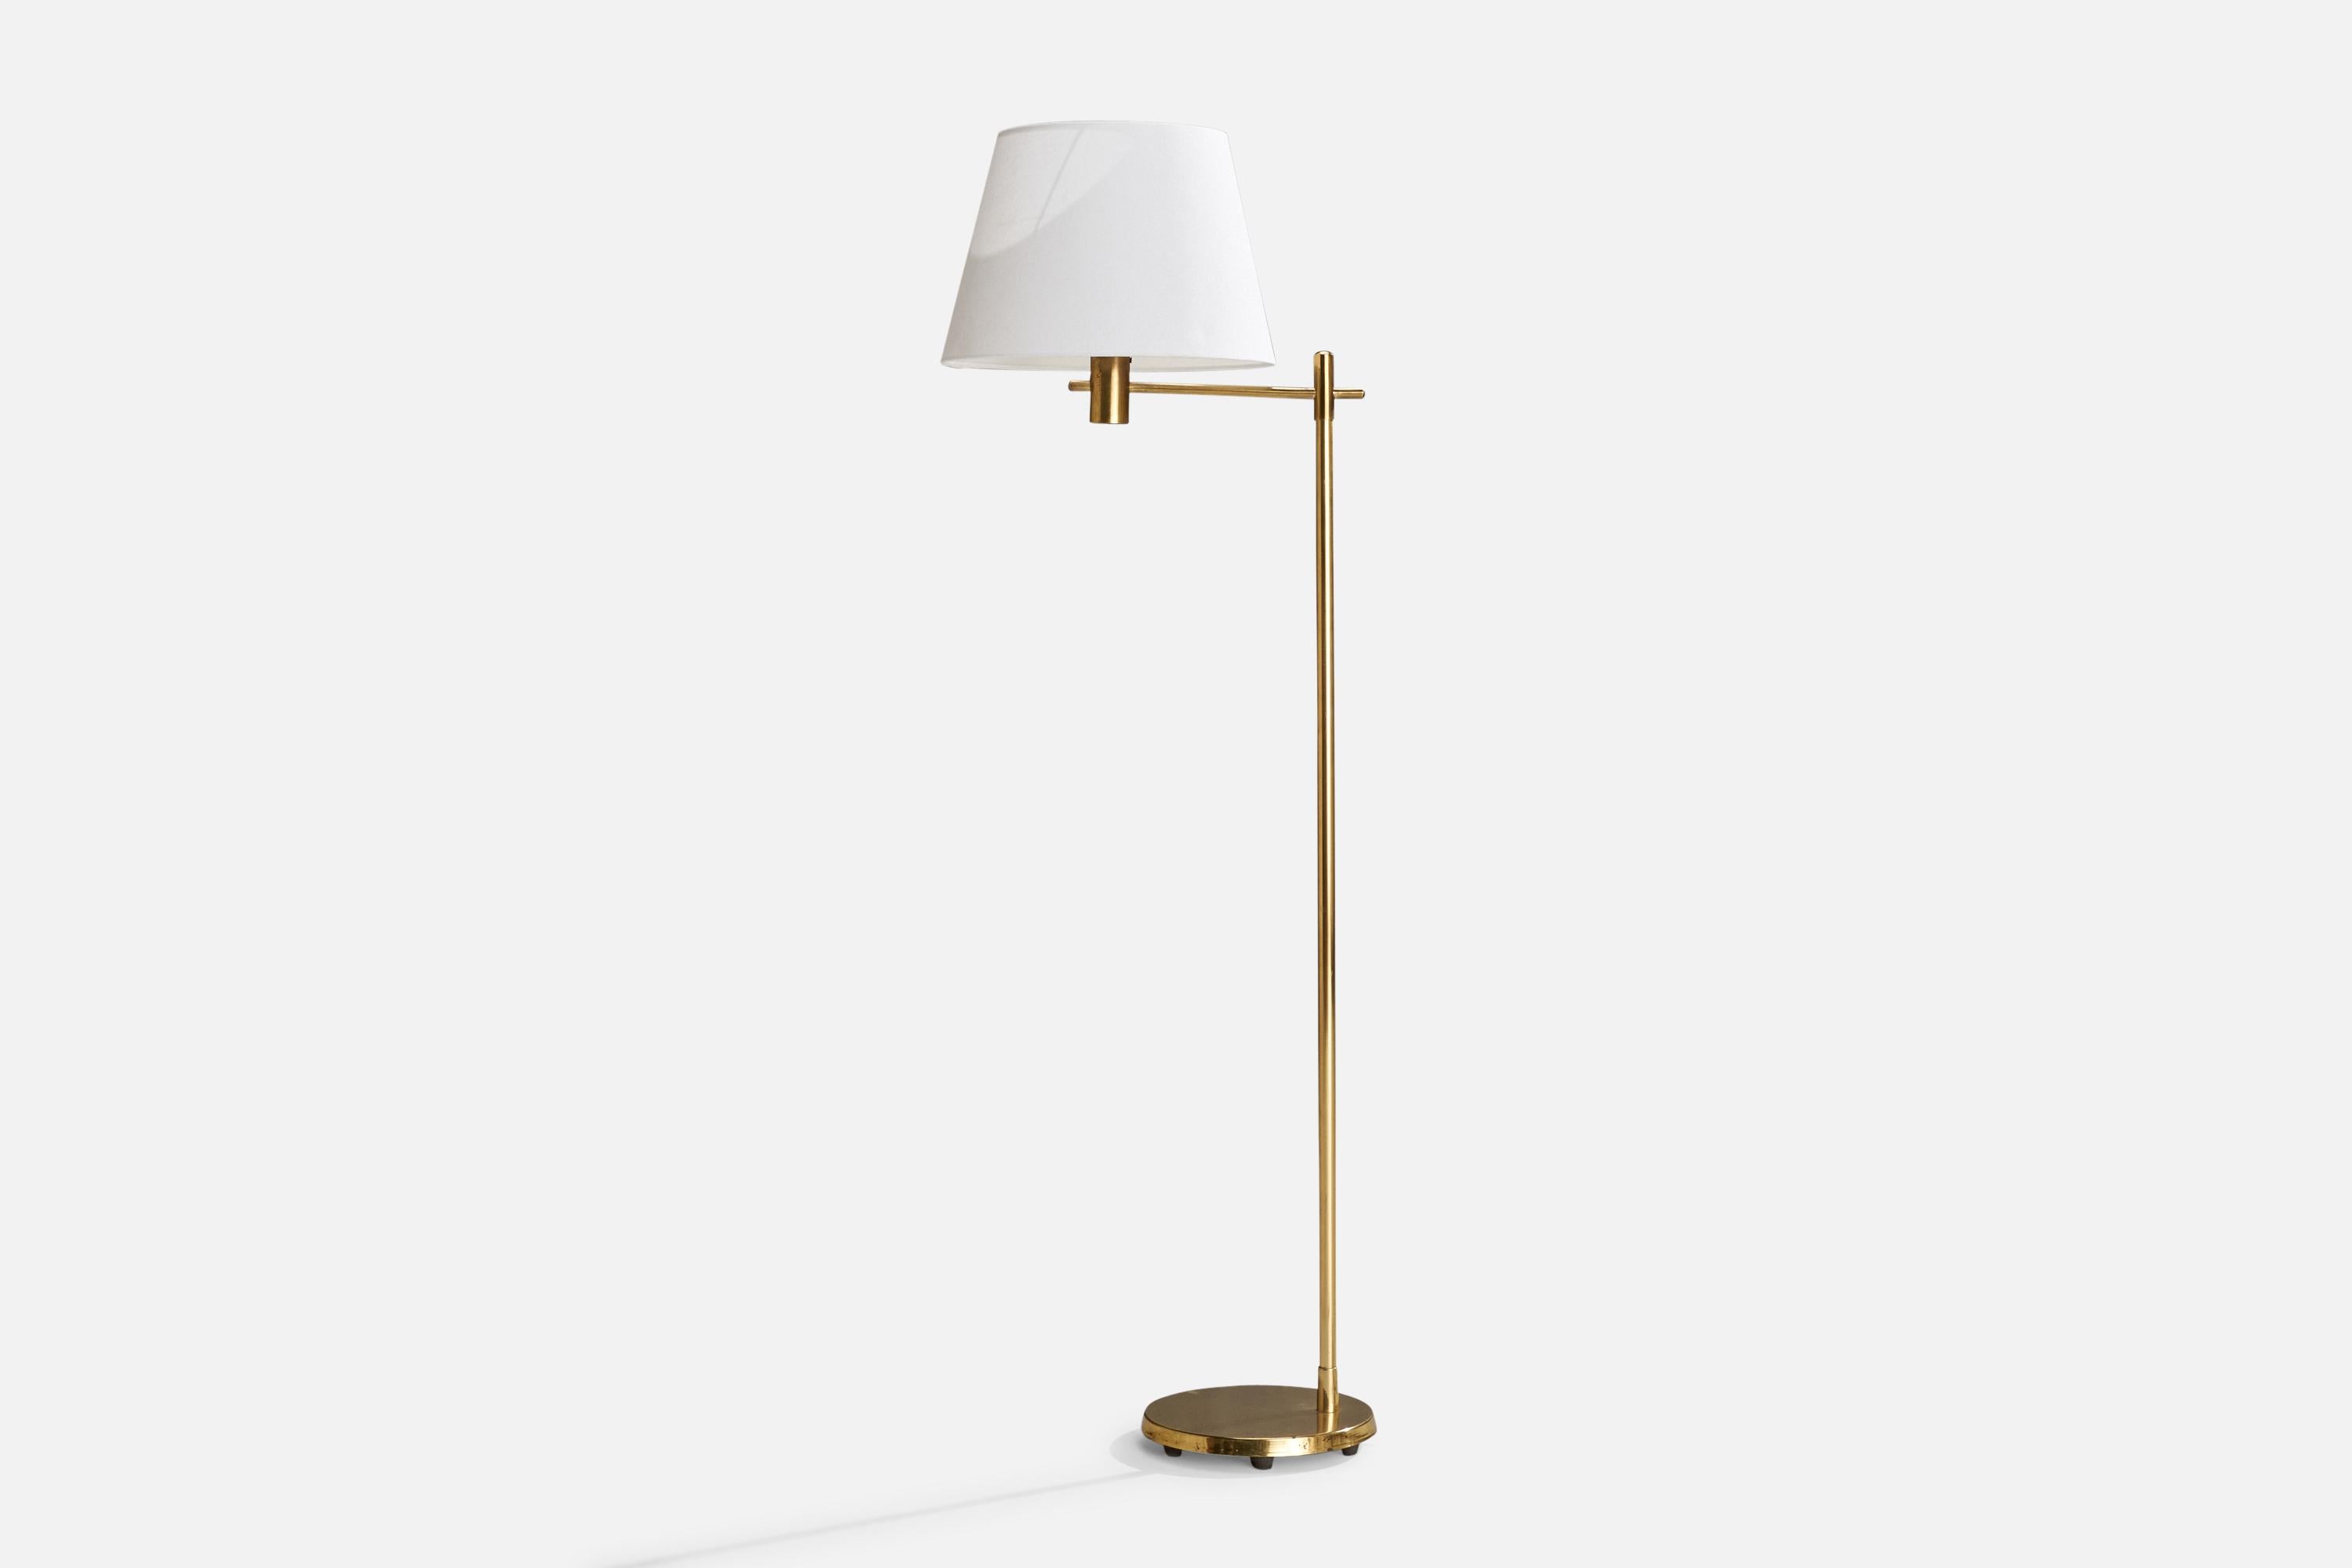 A brass and white fabric floor lamp designed and produced in Sweden, c. 1970s.

Overall Dimensions (inches): 56” H x 13.75” W x 19.25” D
Stated dimensions include shade.
Bulb Specifications: E-26 Bulb
Number of Sockets: 1
All lighting will be